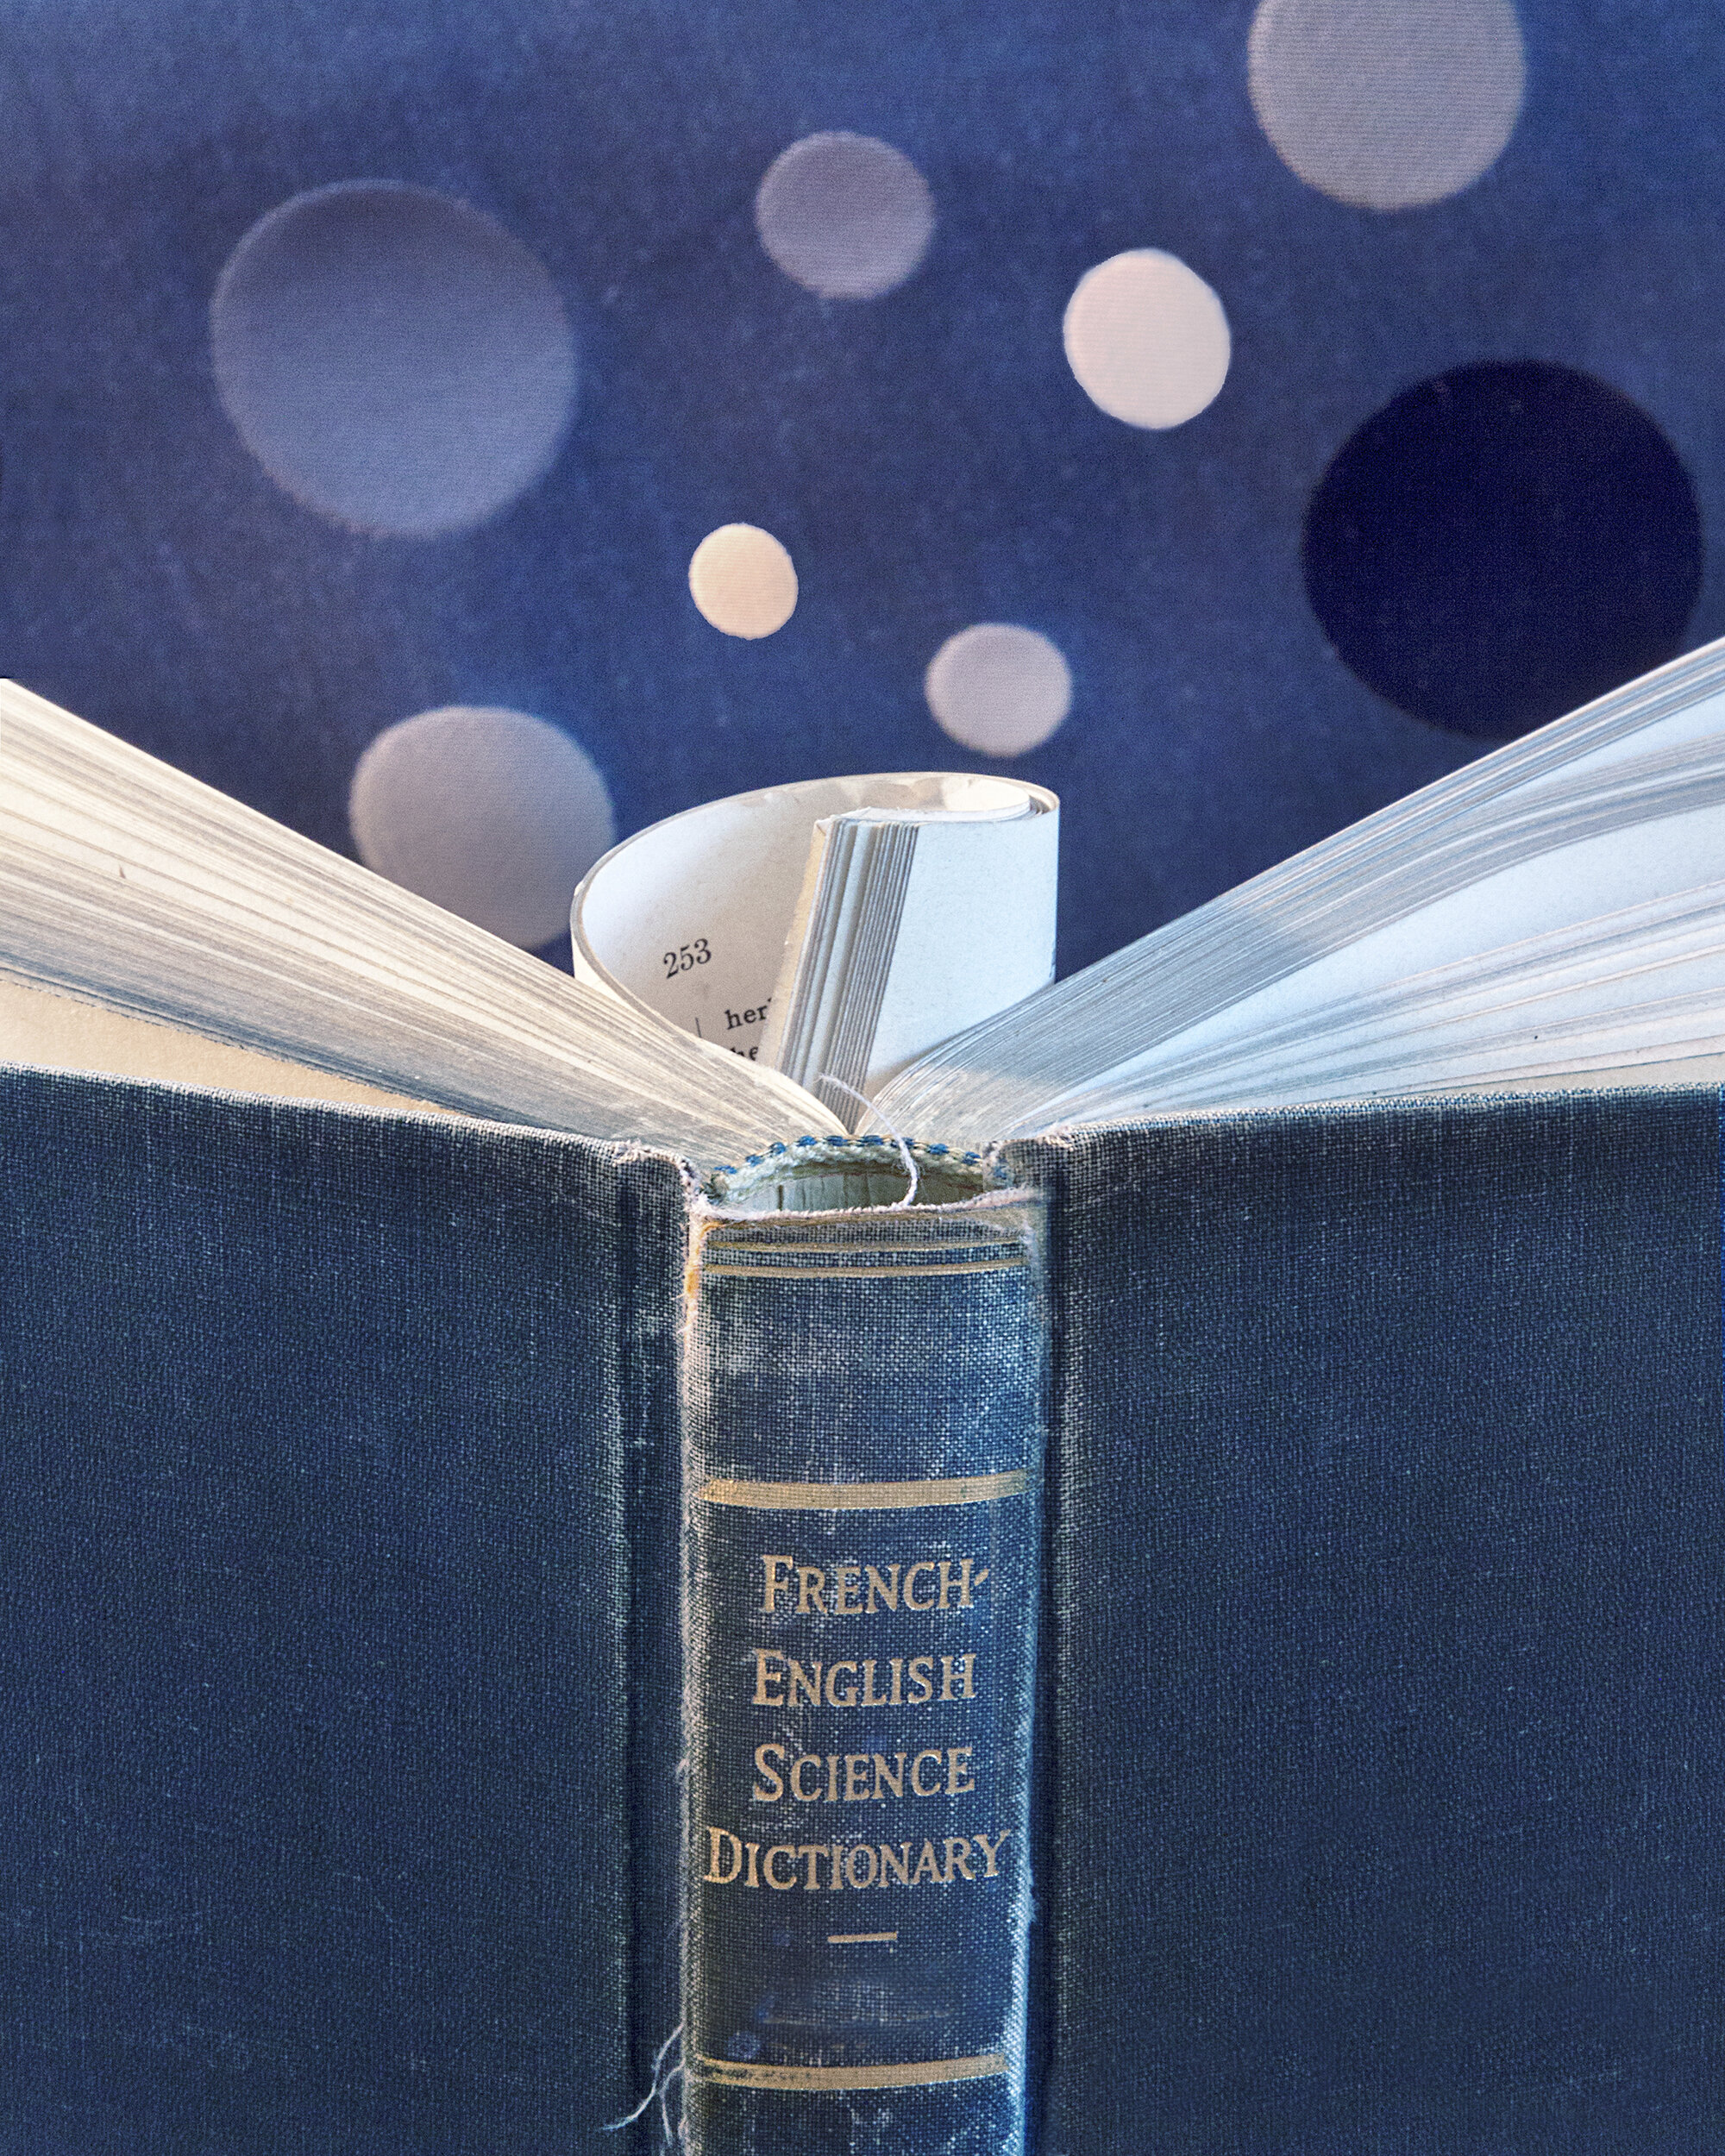  Science Dictionary with Spheres, 2014 